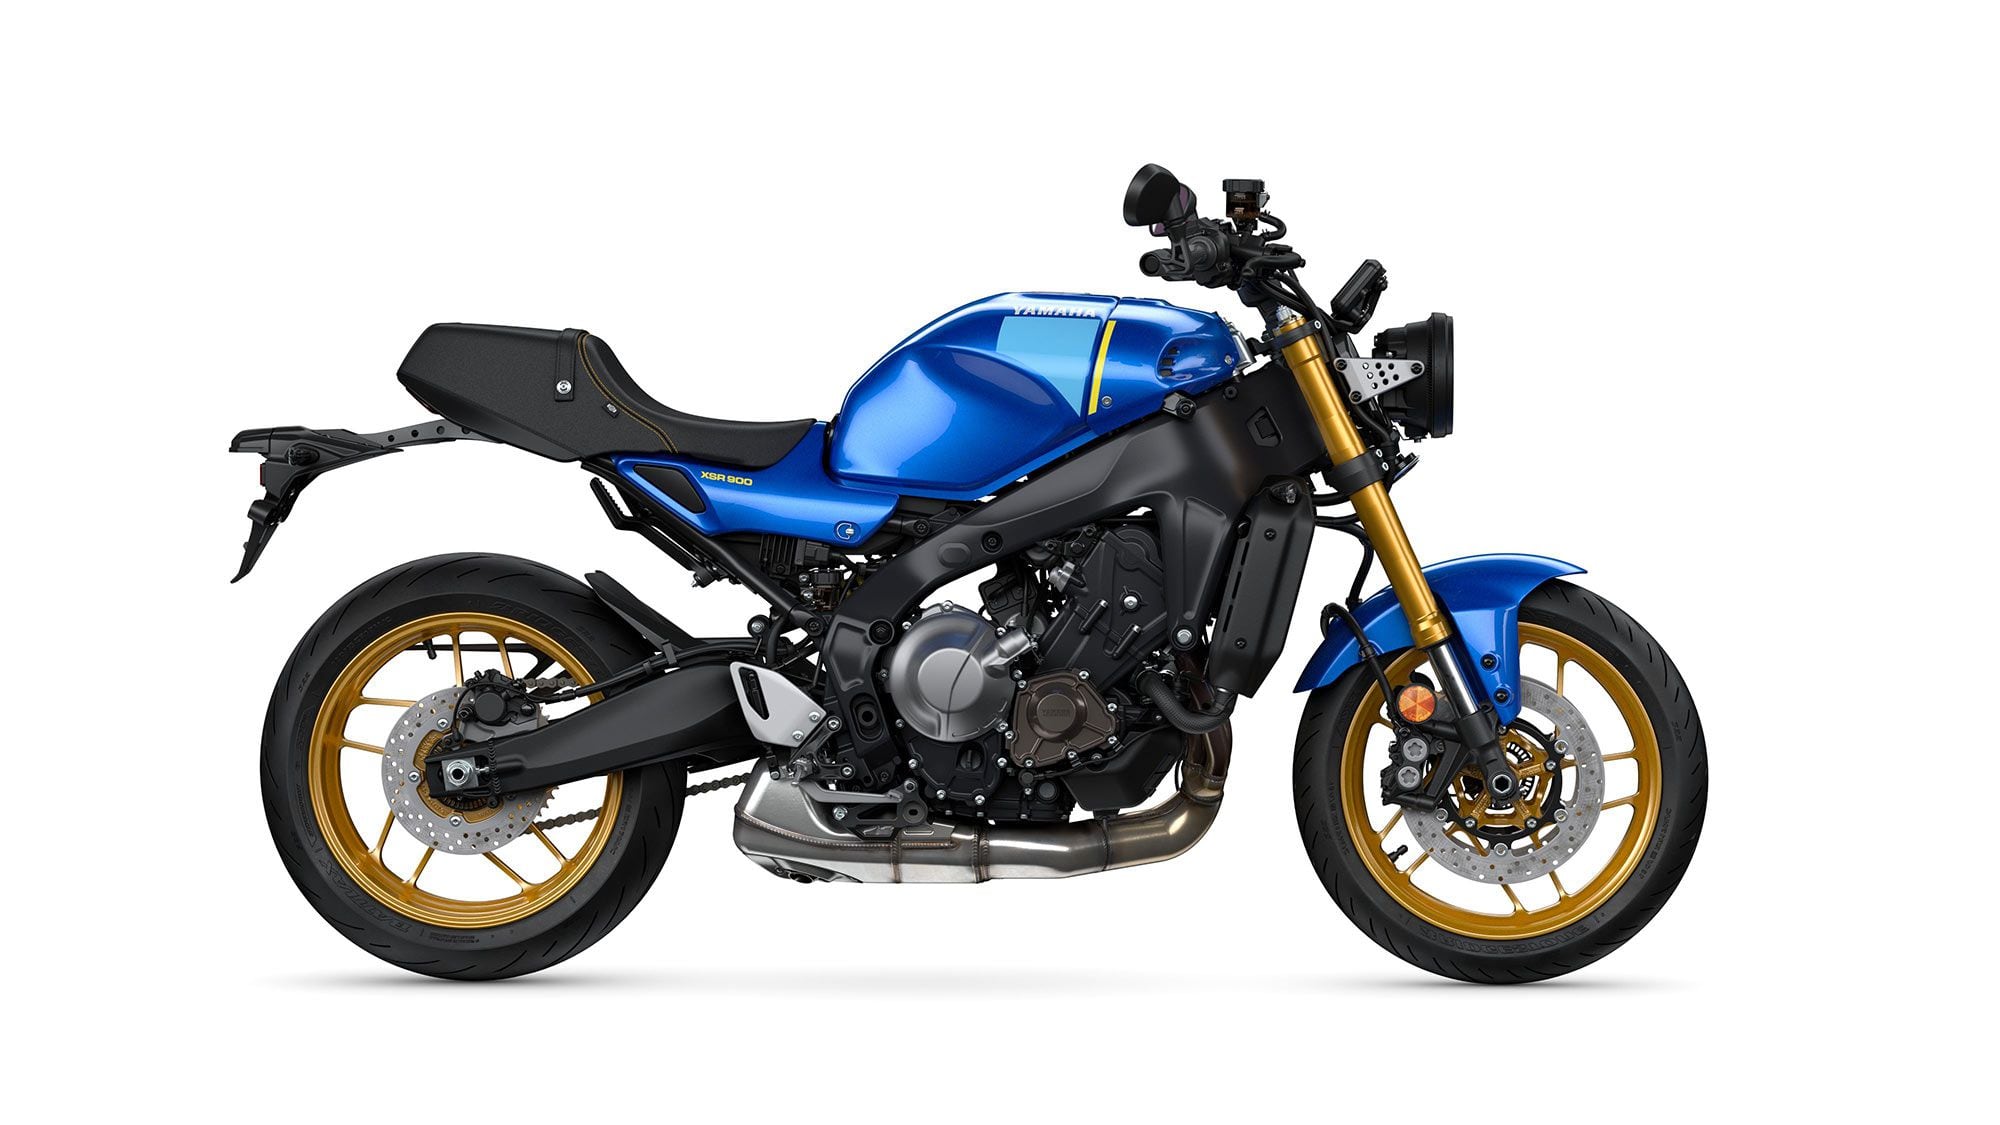 The vaguely retro feel continues up front, though the bike’s overall profile is much cleaner, with a low-slung exhaust and a model-specific subframe.